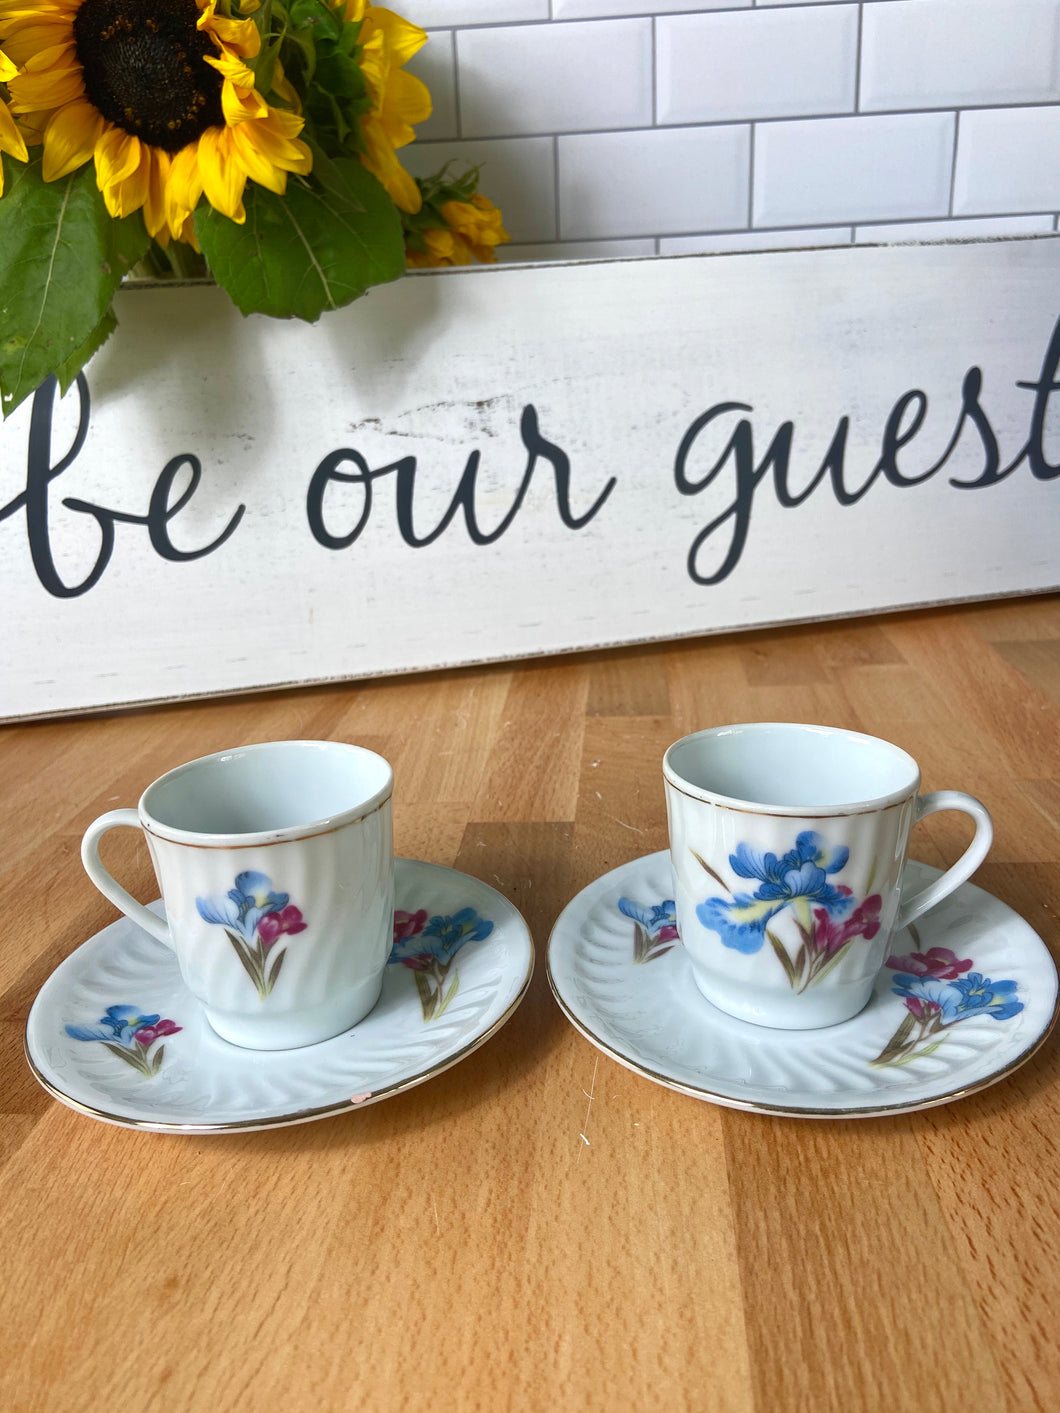 Beauty and the Beast Party Decoration: Candle Holding Teacup Duo